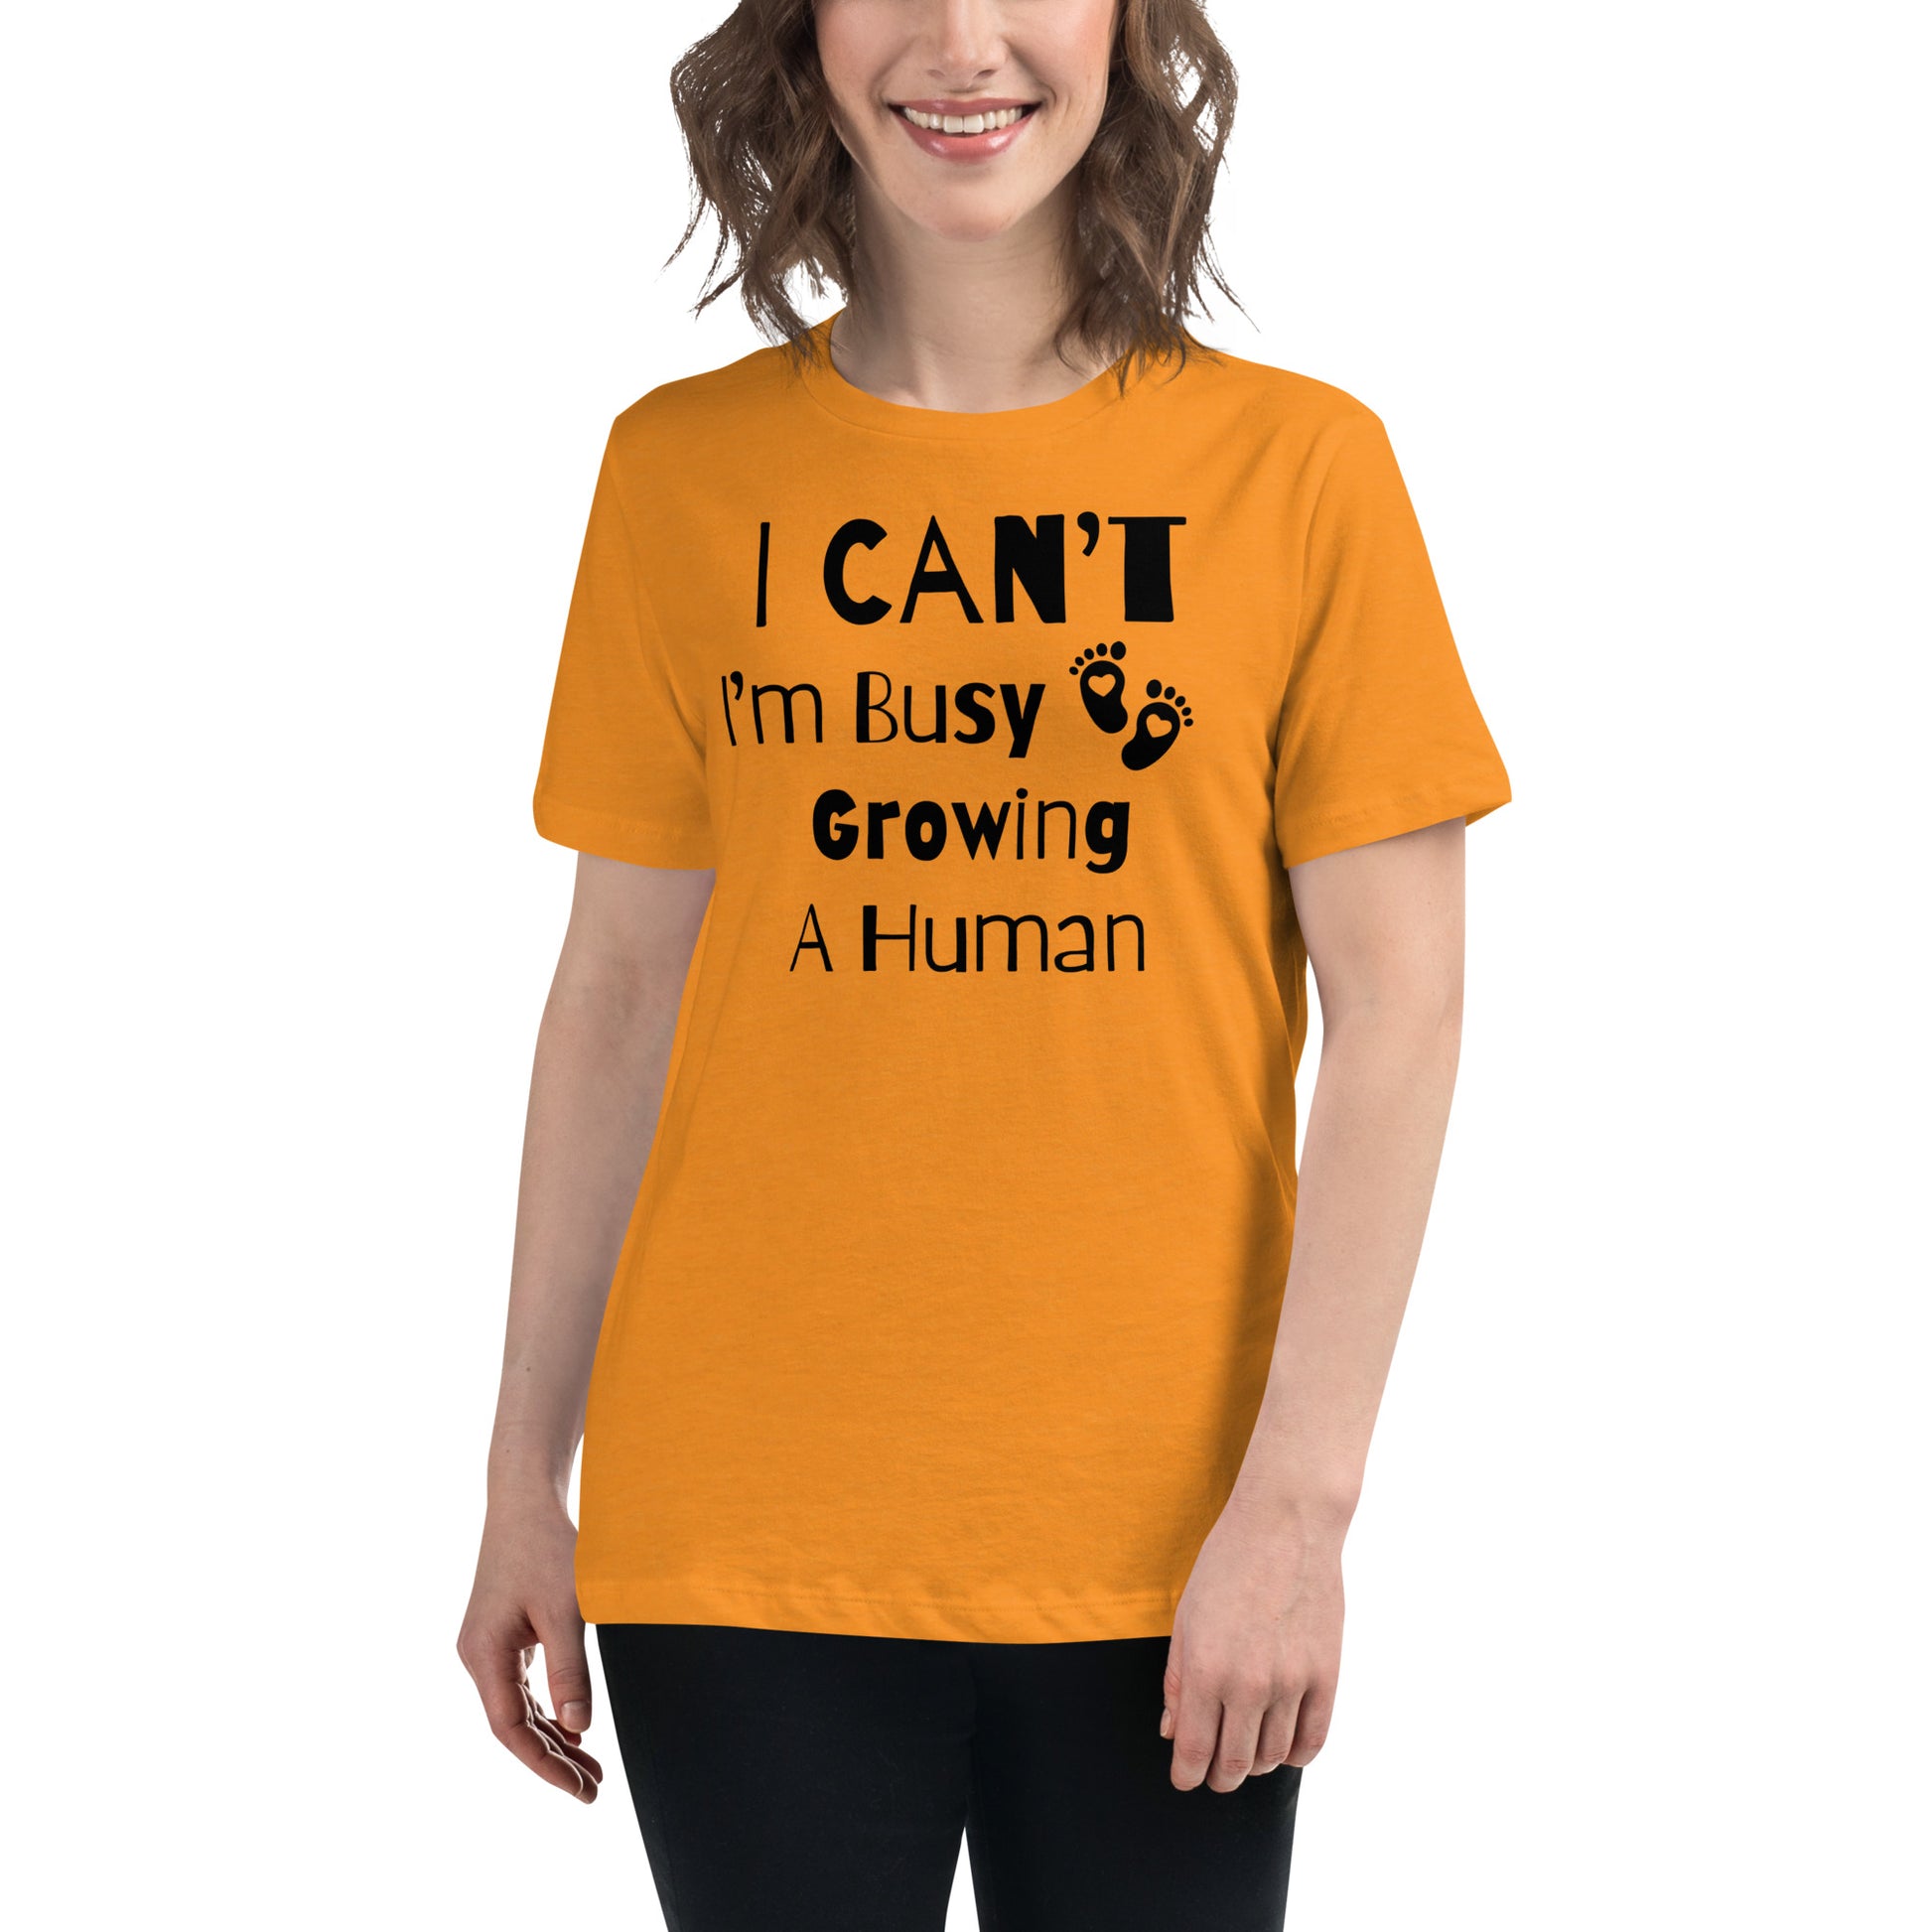 "I Can't, I'm Busy Growing A Human" Women's Shirt - Weave Got Gifts - Unique Gifts You Won’t Find Anywhere Else!